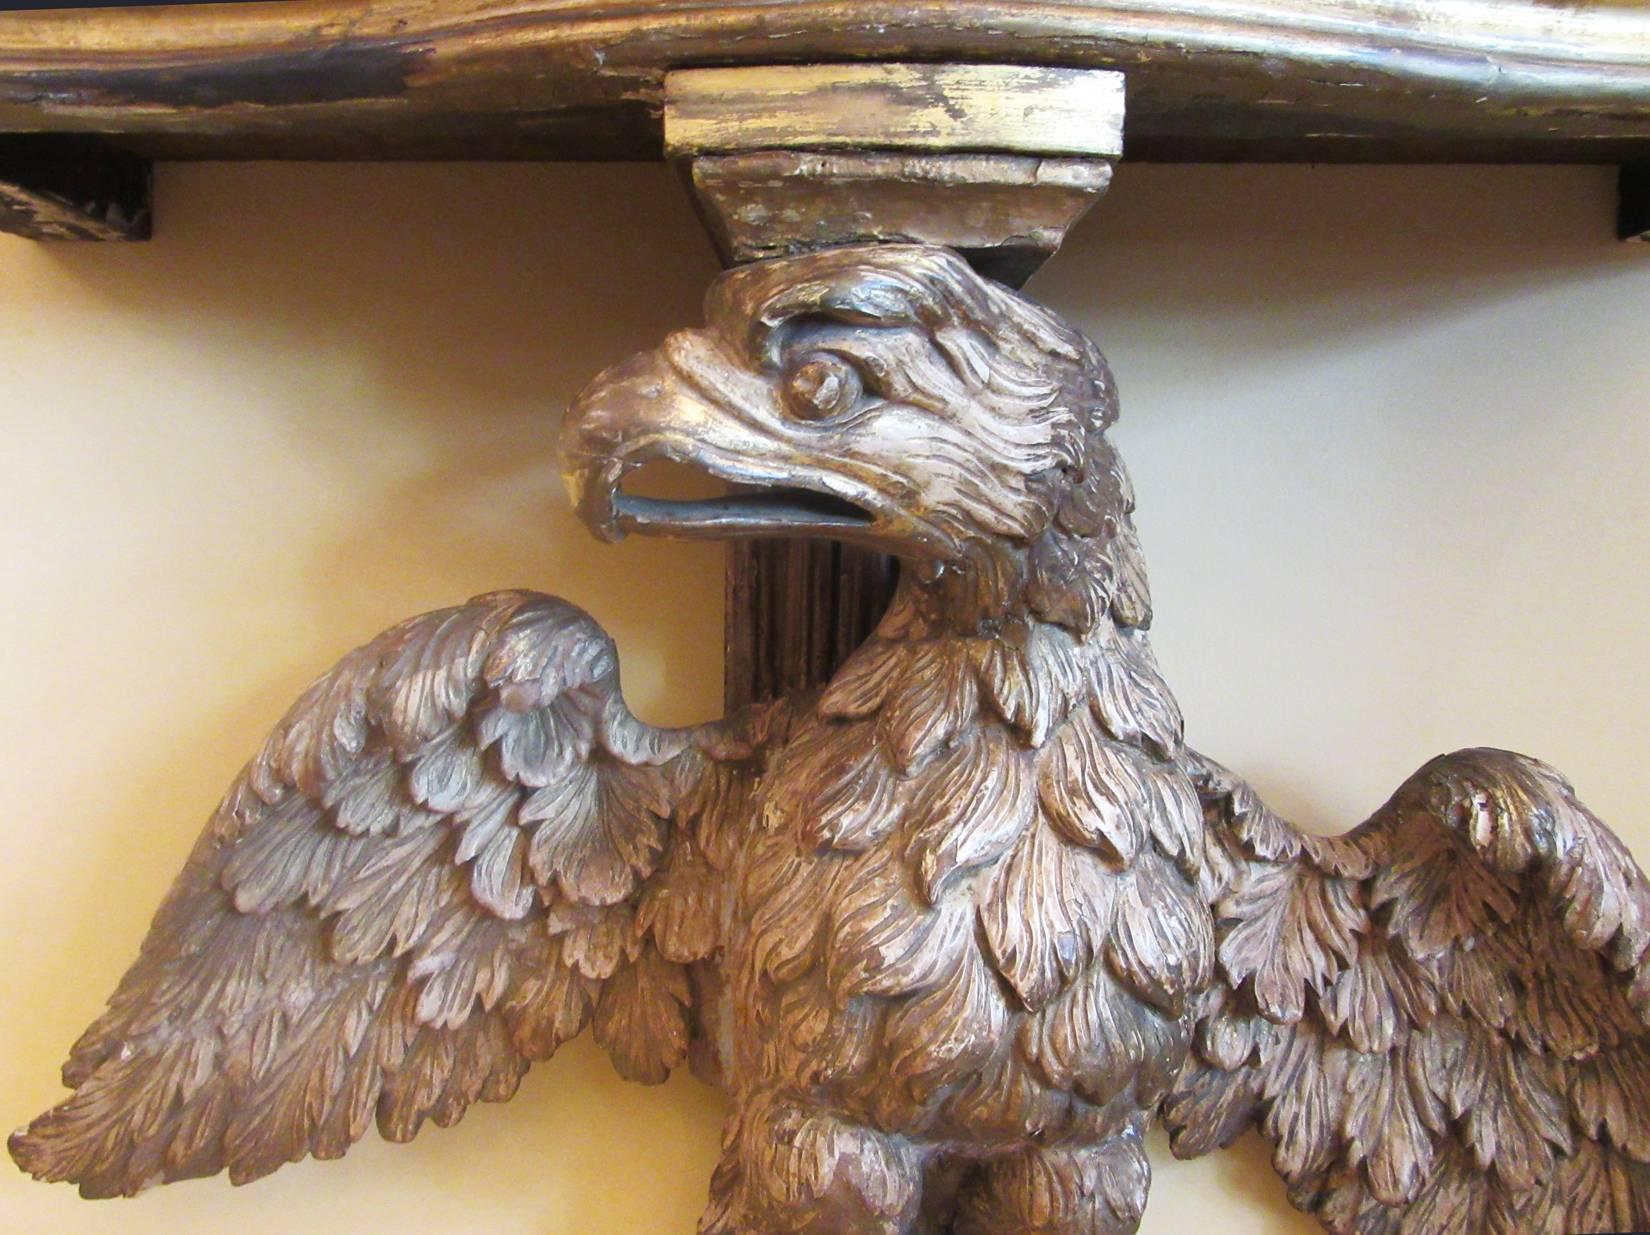 A finely carved mid-18th century English Georgian console table, circa 1750, with a rose marble-top and base featuring a displayed eagle on a plinth. This table has been attributed to William Kent.